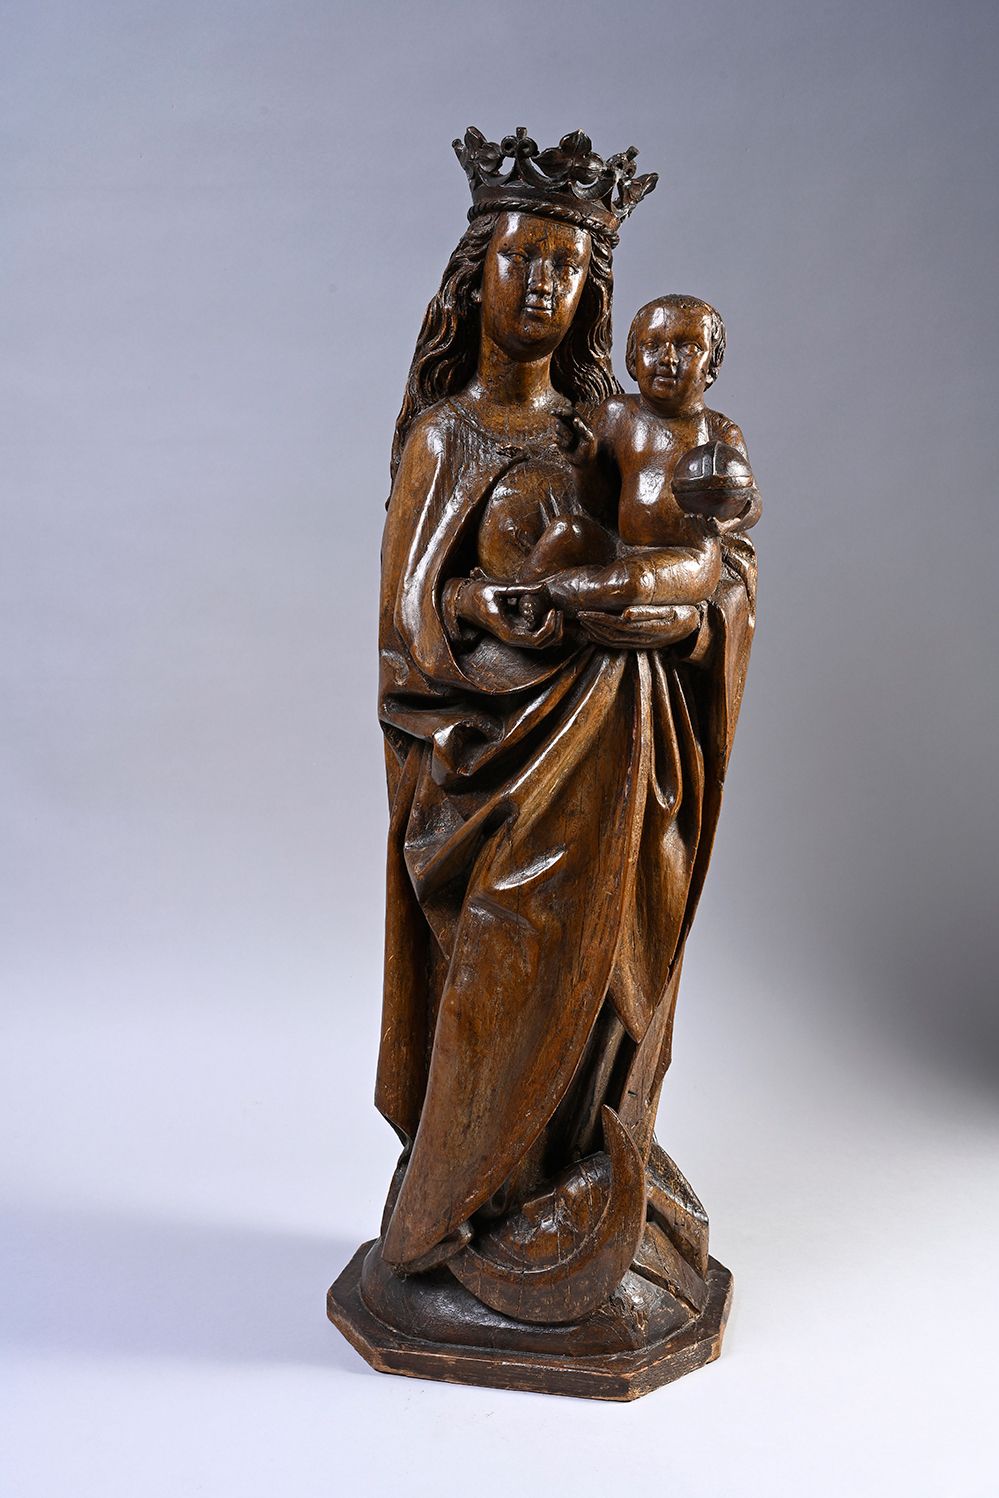 Null Virgin and Child in carved wood, back hollowed out and closed. Standing, ho&hellip;